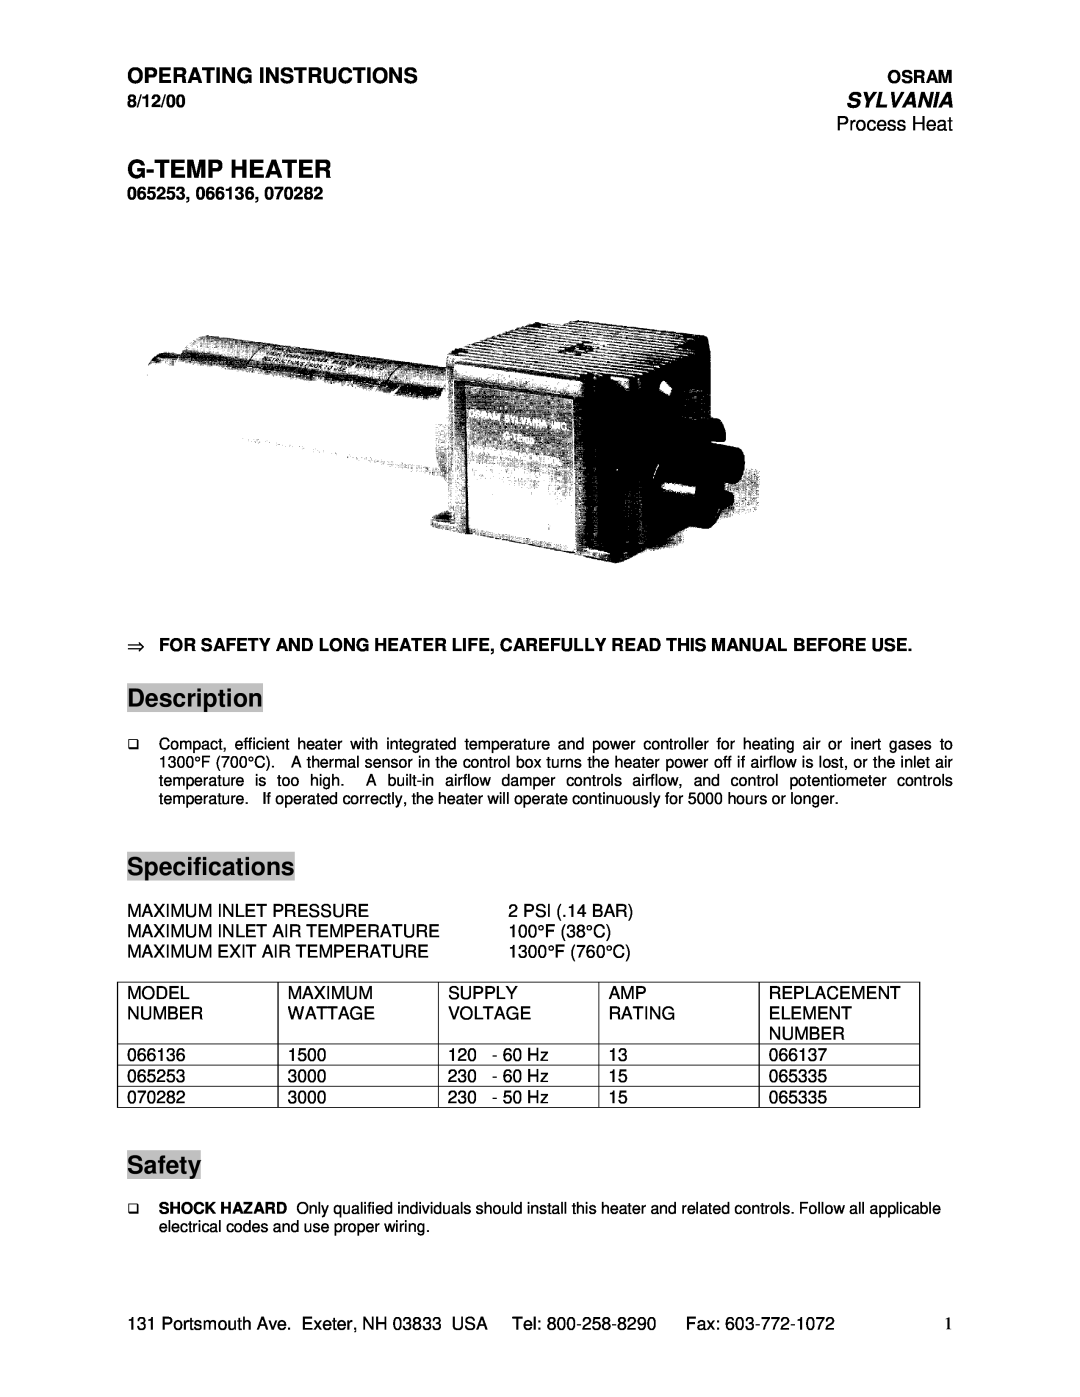 Sylvania 066136 specifications G-Tempheater, Description, Specifications, Safety, Operating Instructions, Sylvania, Osram 